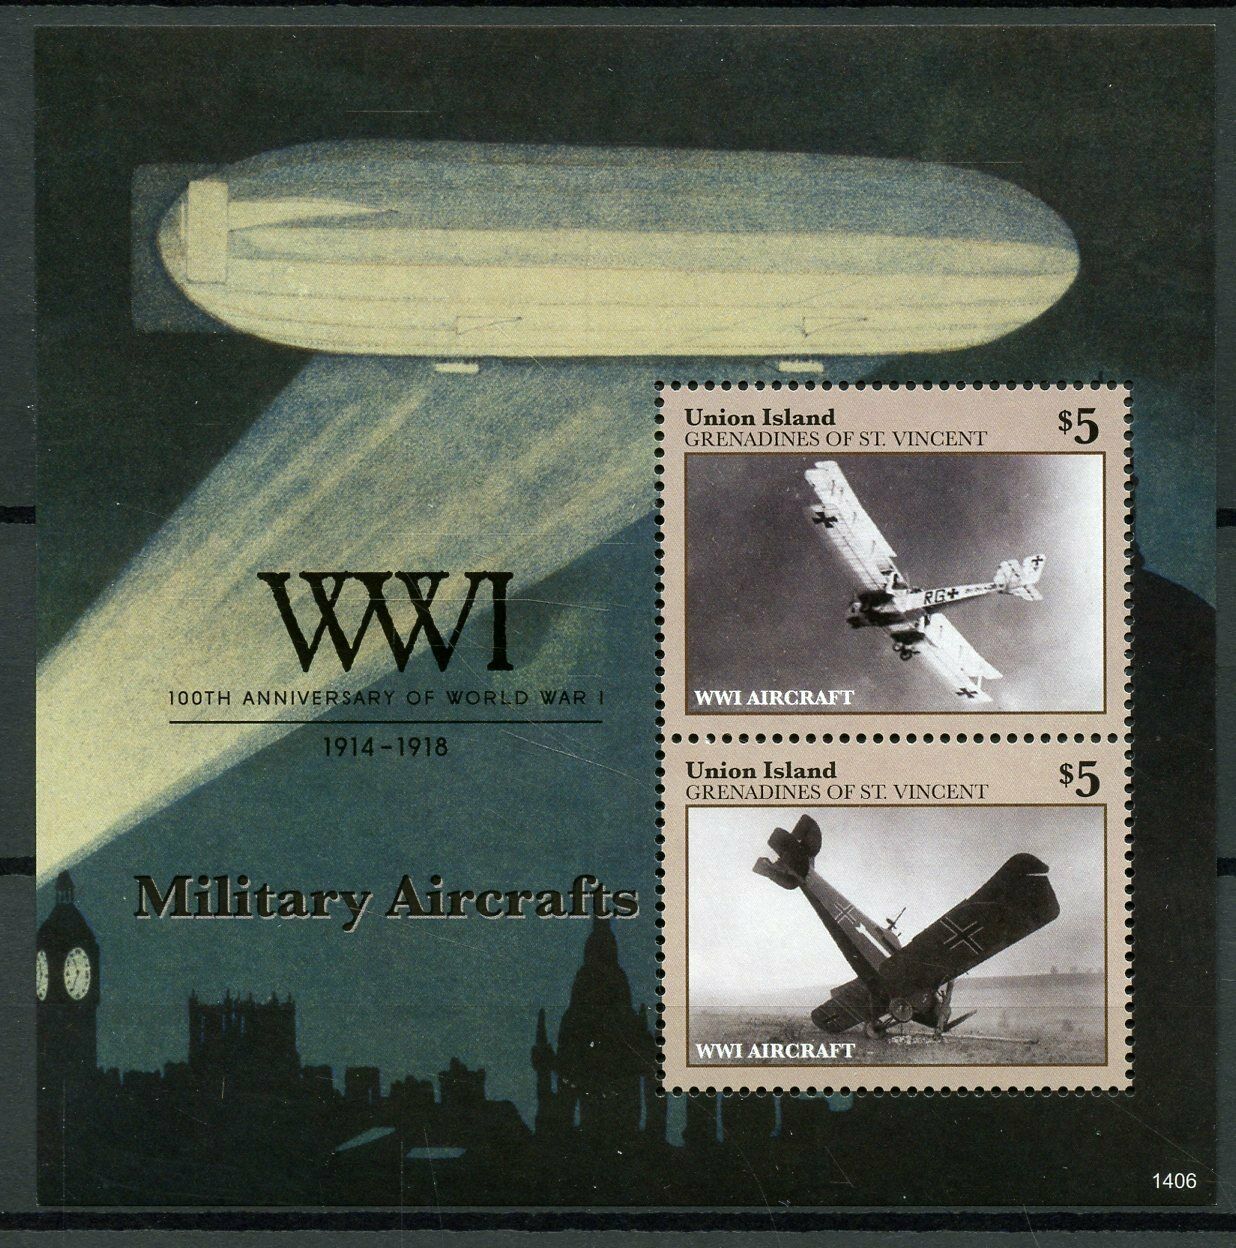 Union Island Gren St Vincent 2014 MNH WWI WW1 Military Aircrafts 2v S/S Stamps